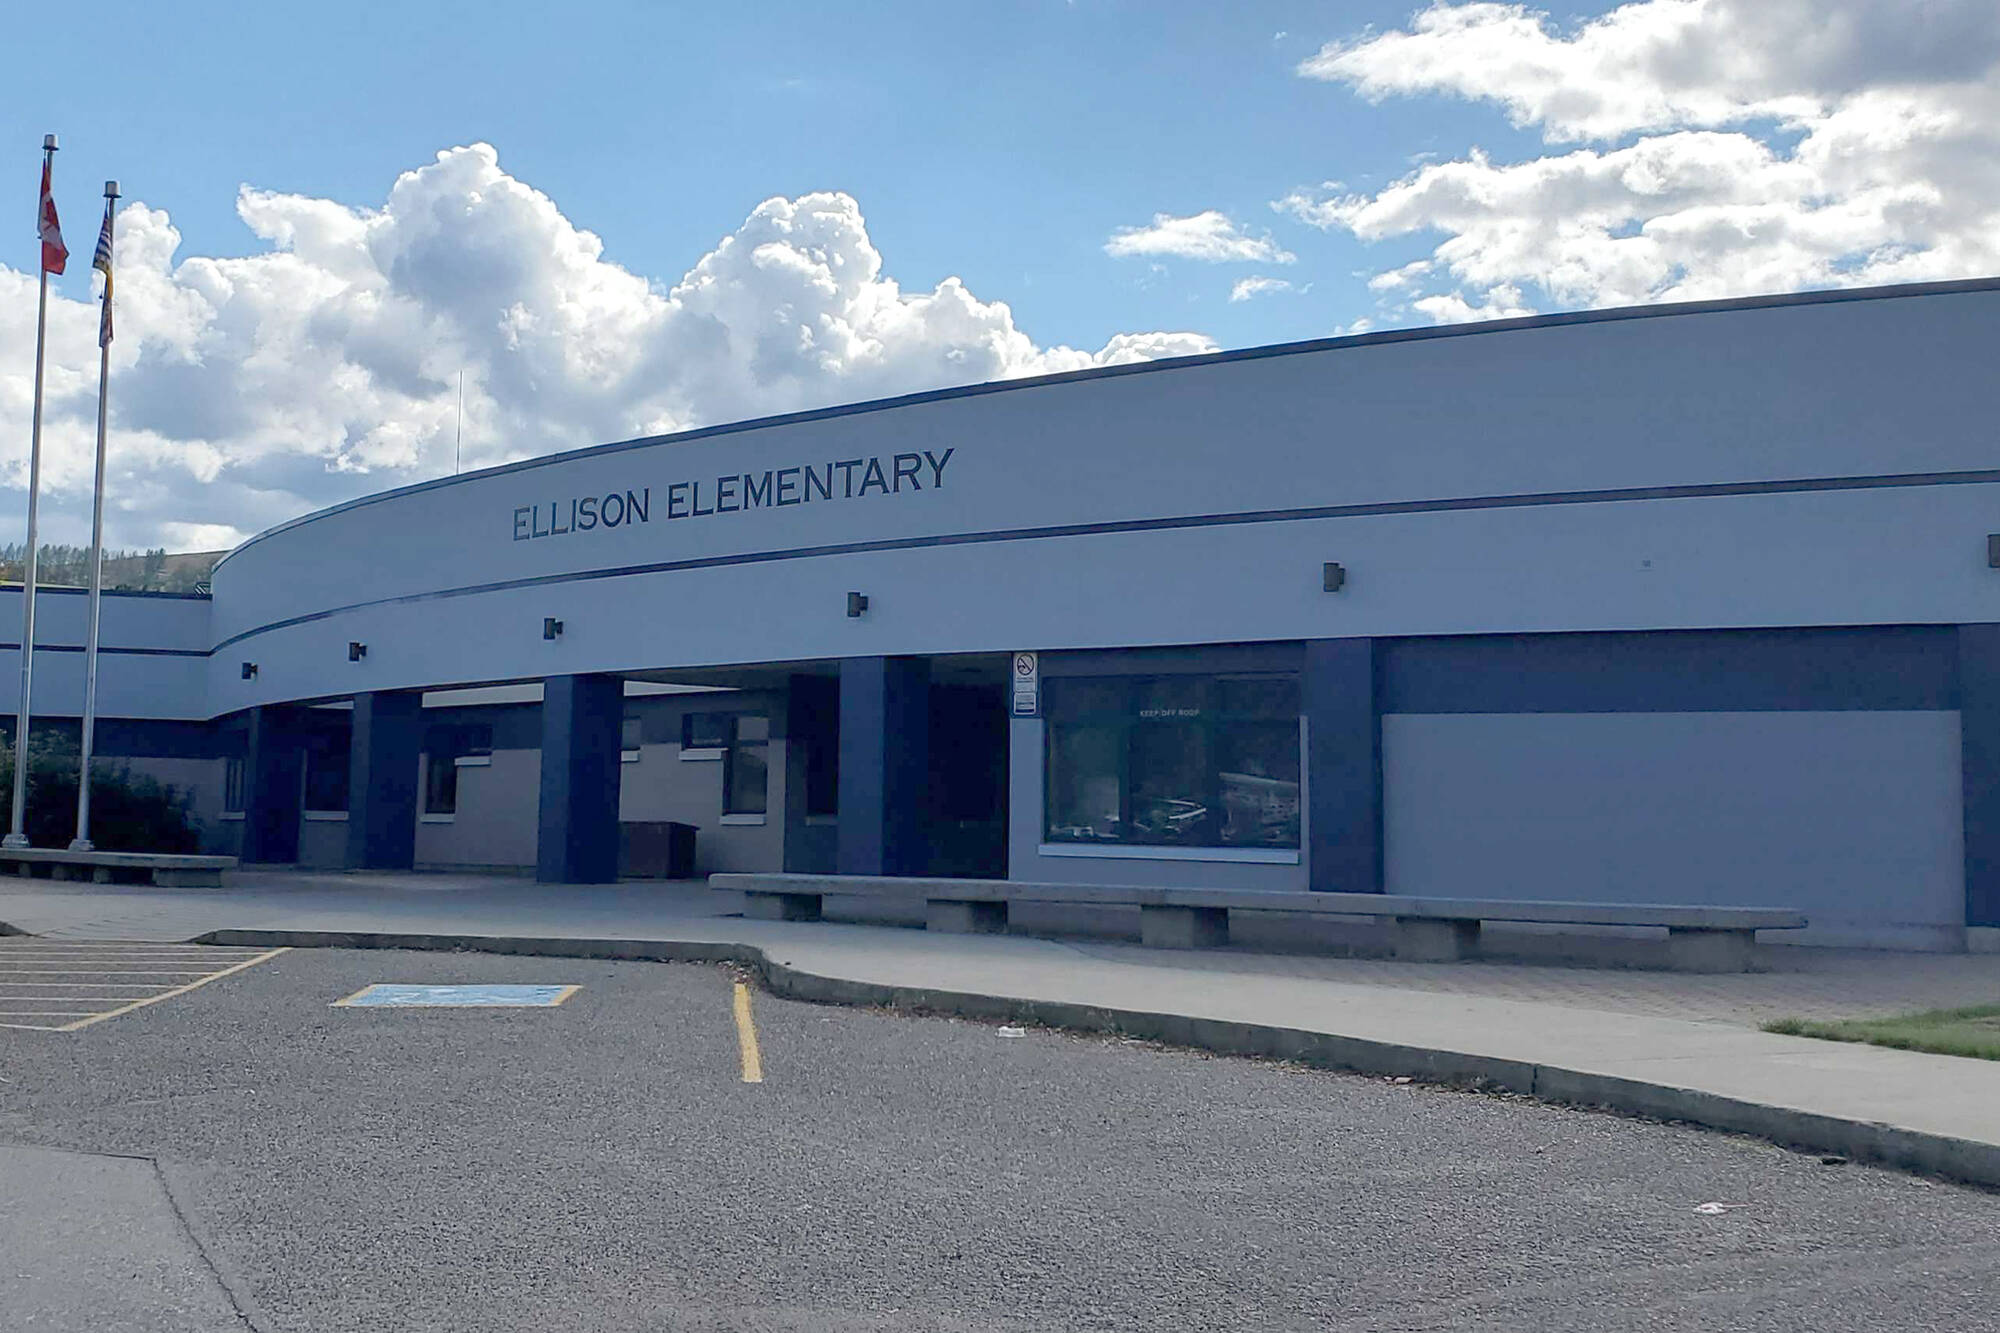 Ellison Elementary School was one of two school in Vernon where suspicious activity was reported to police on Wednesday, Oct. 19, 2022. (Morning Star file photo)